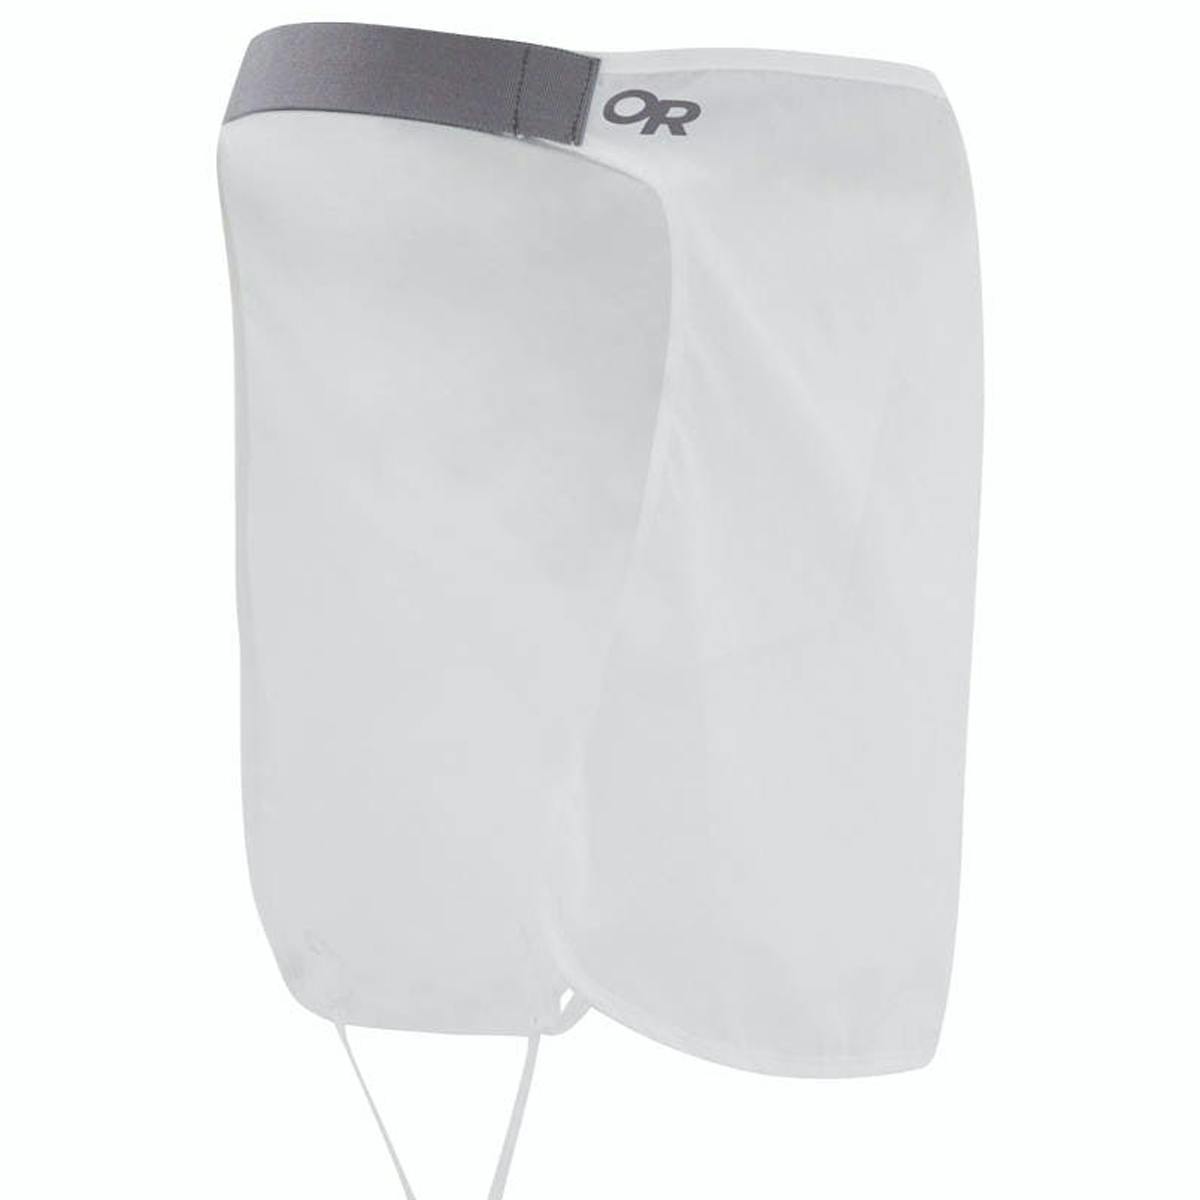 Outdoor Research Removable Sun Cape